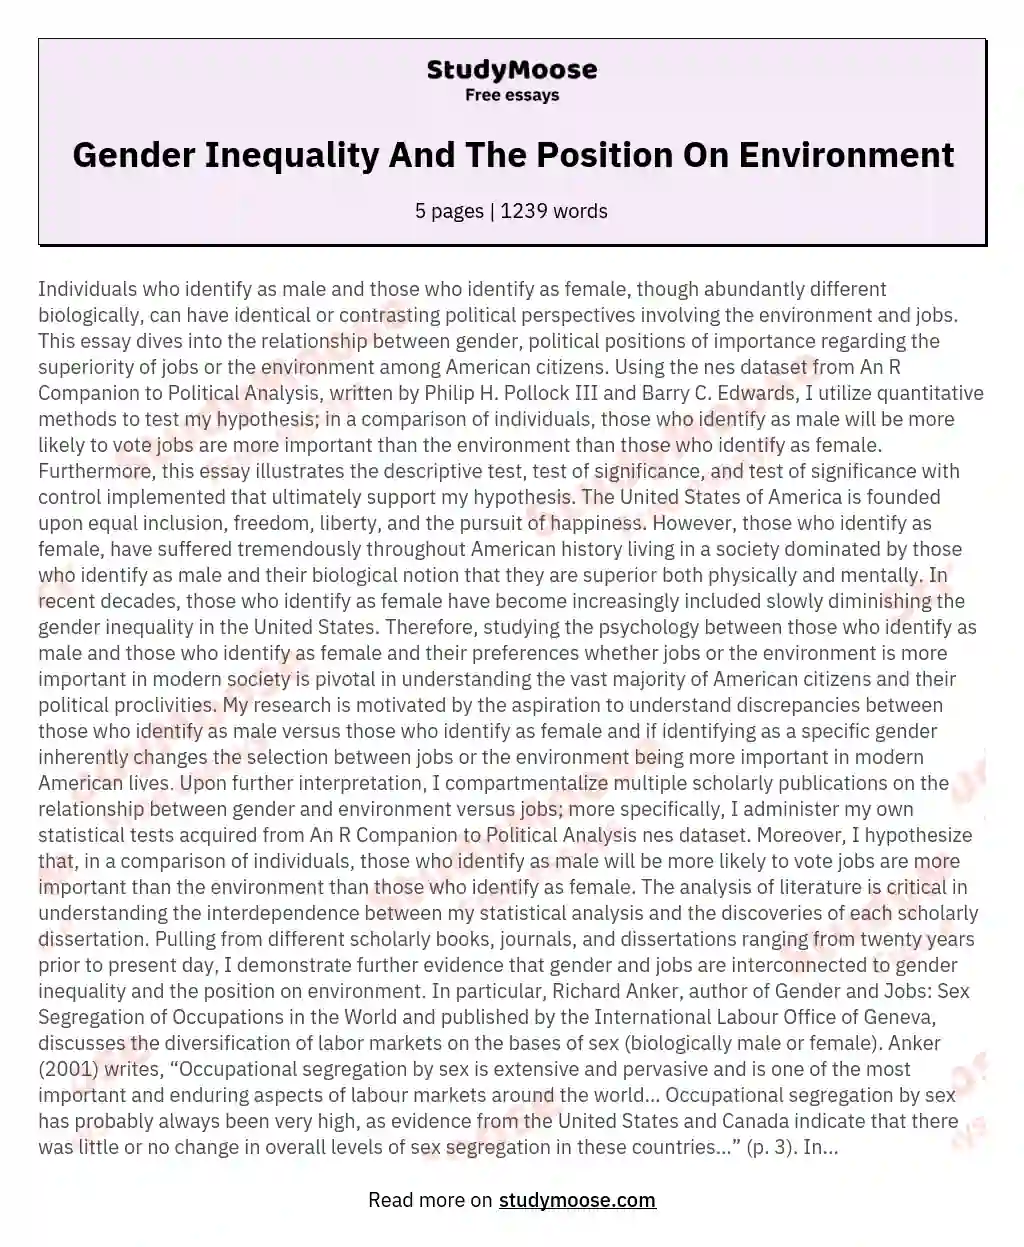 Gender Inequality And The Position On Environment essay